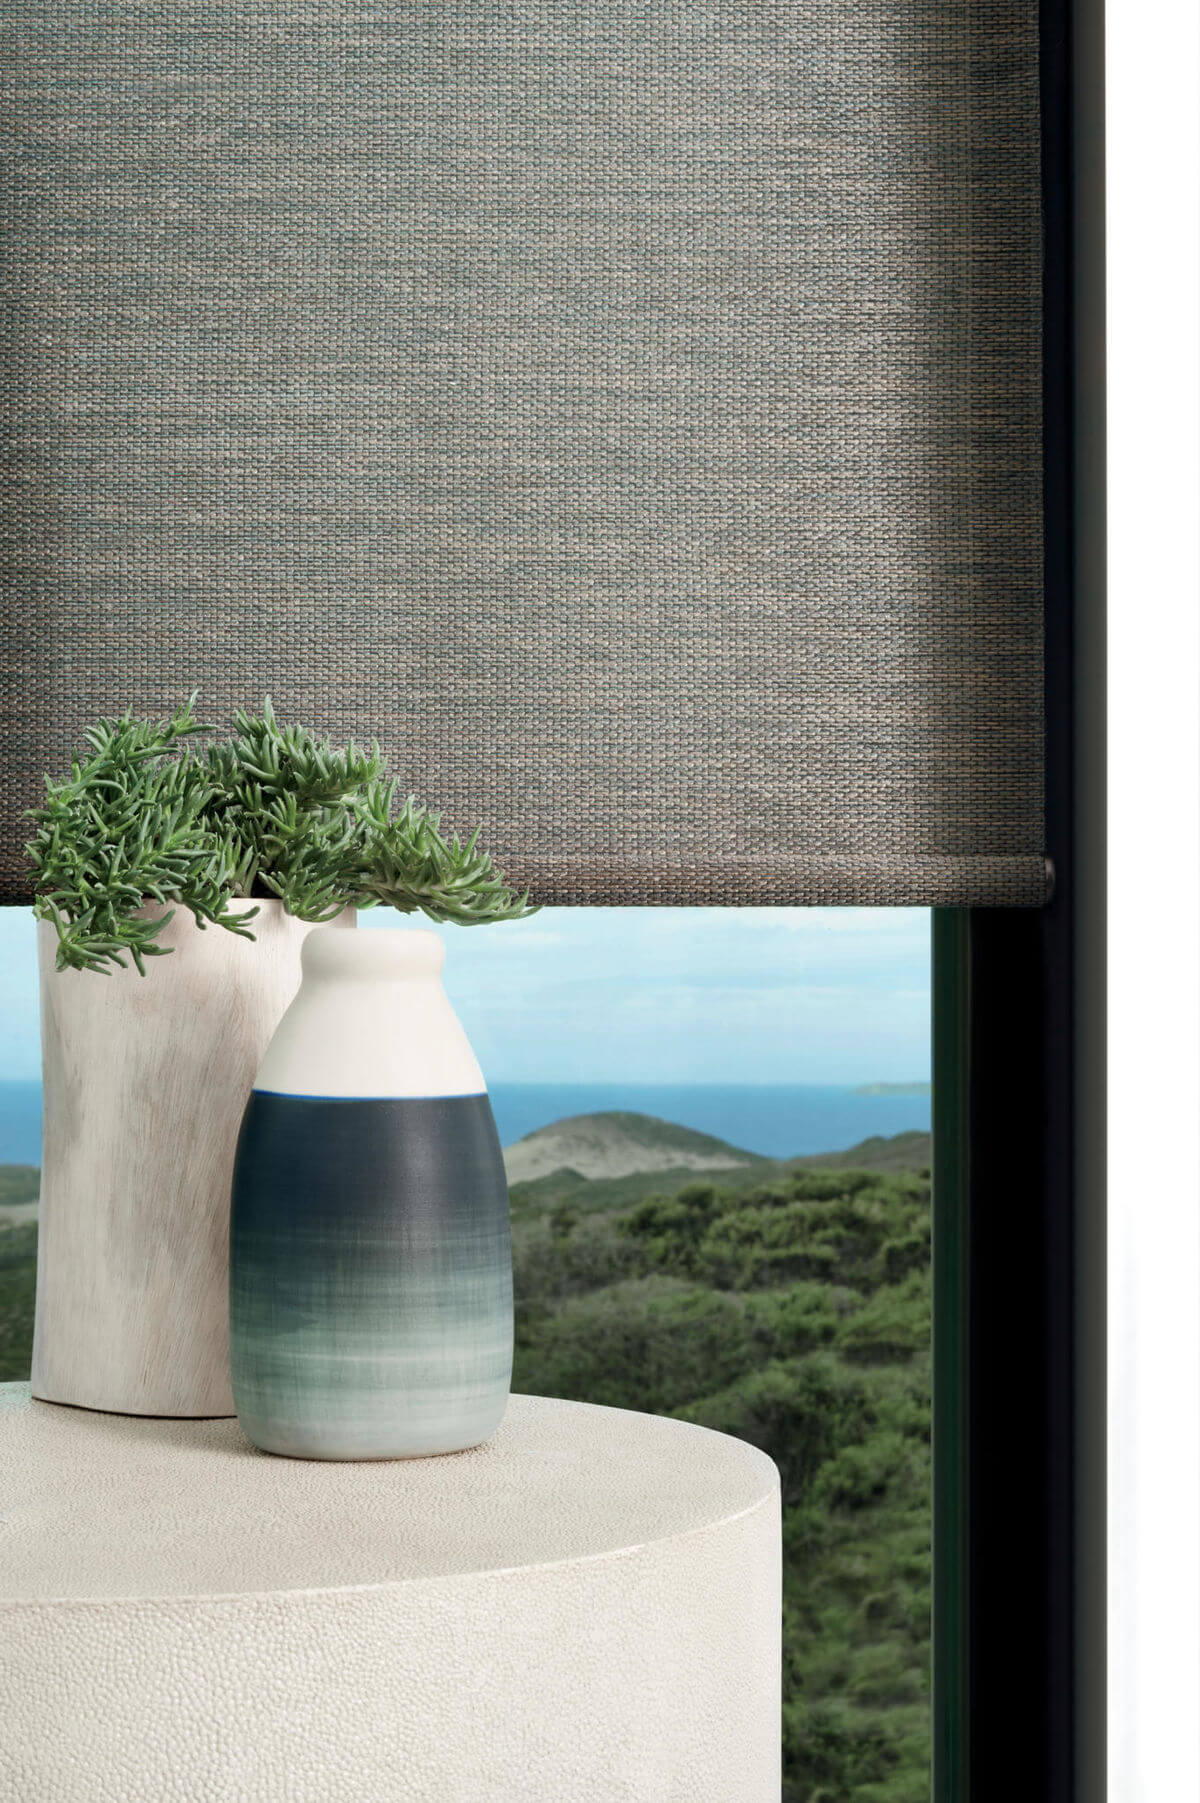 Sustainably harvested materials are great eco-friendly options for window treatments for your home. 